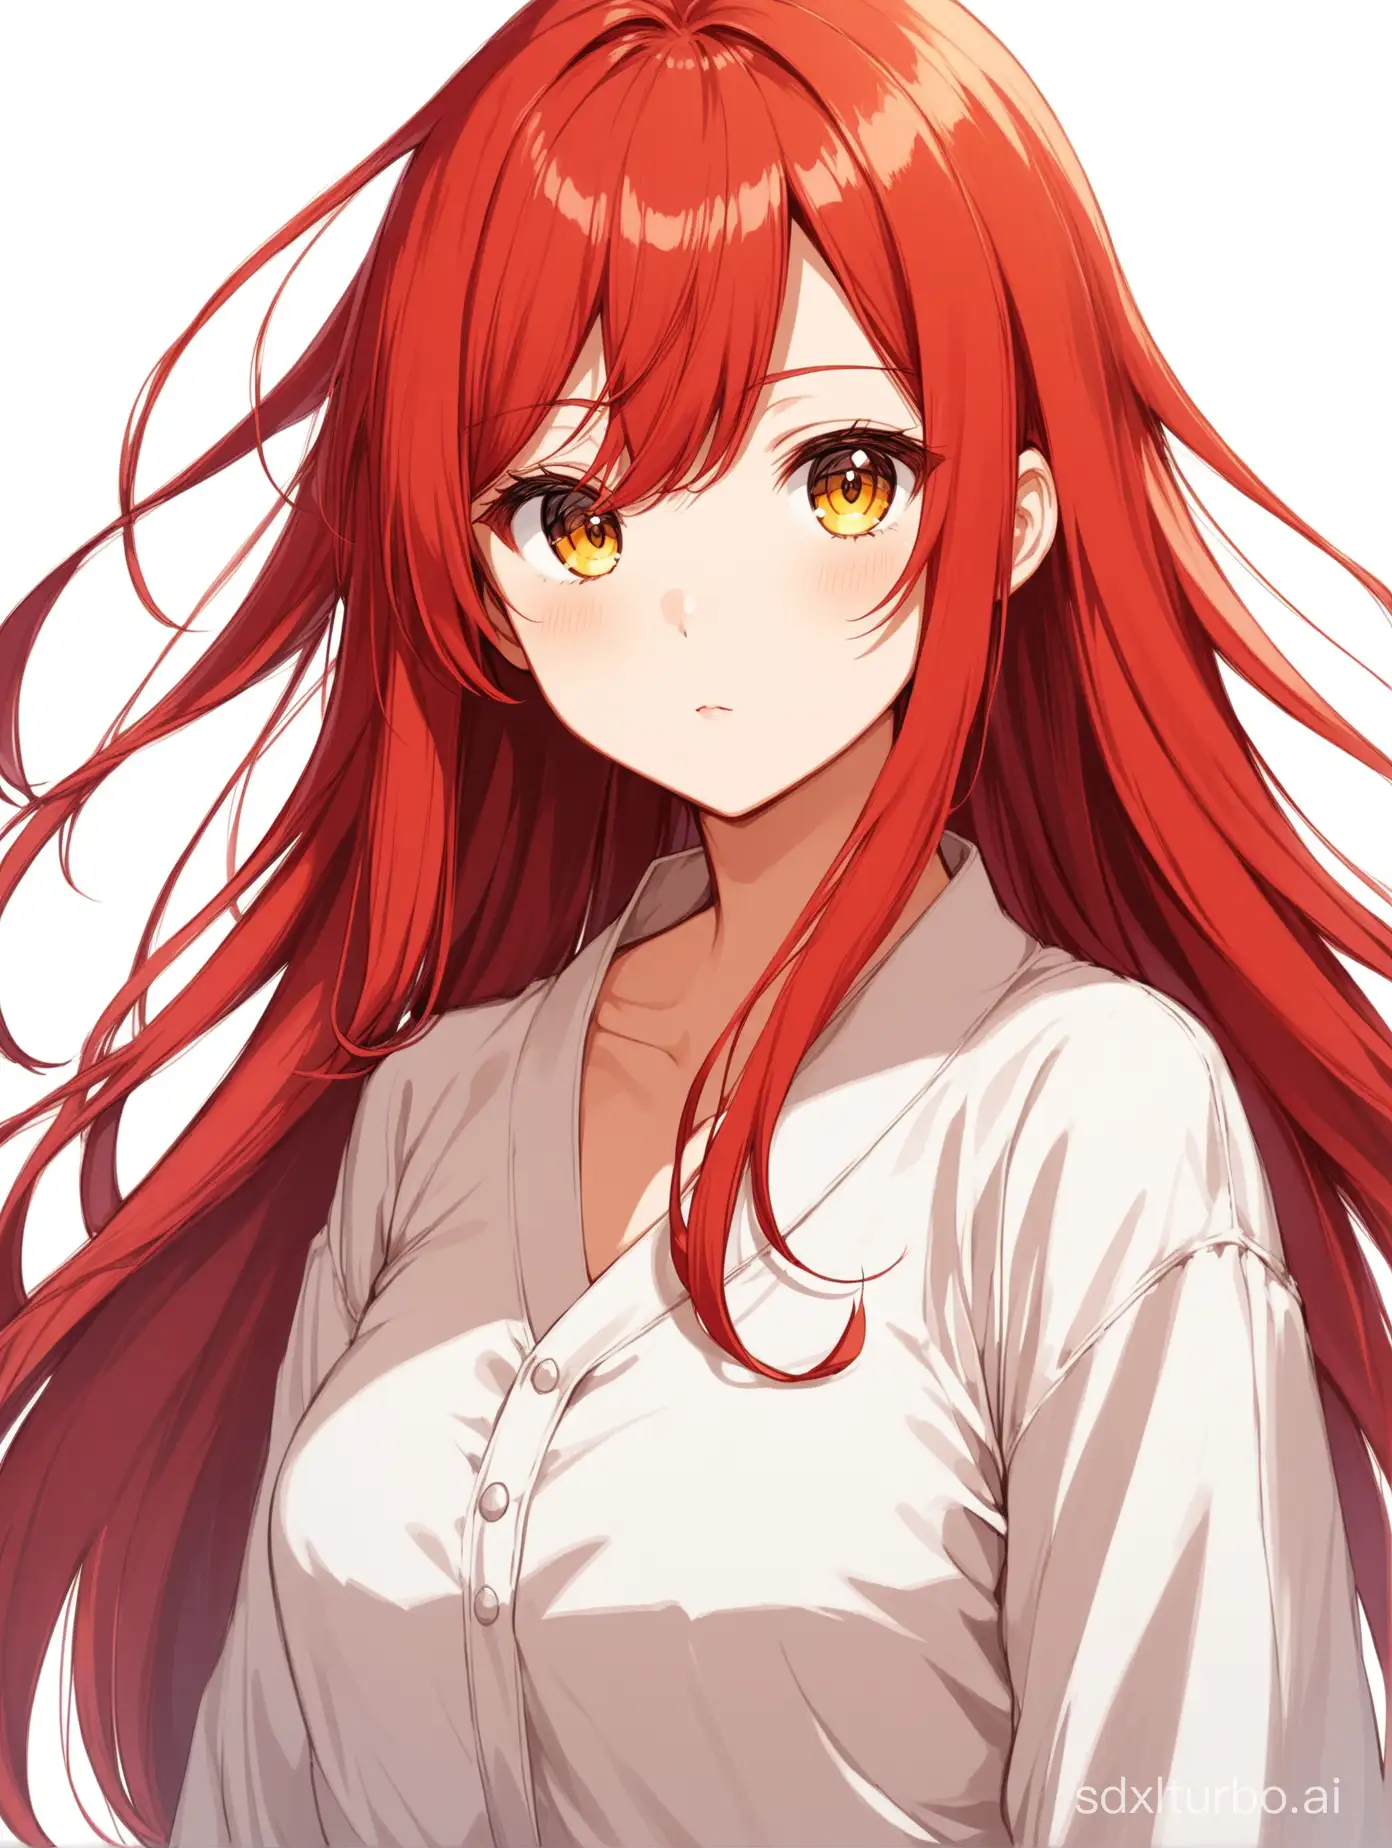 Anime-Portrait-of-a-Young-Woman-with-Long-Red-Hair